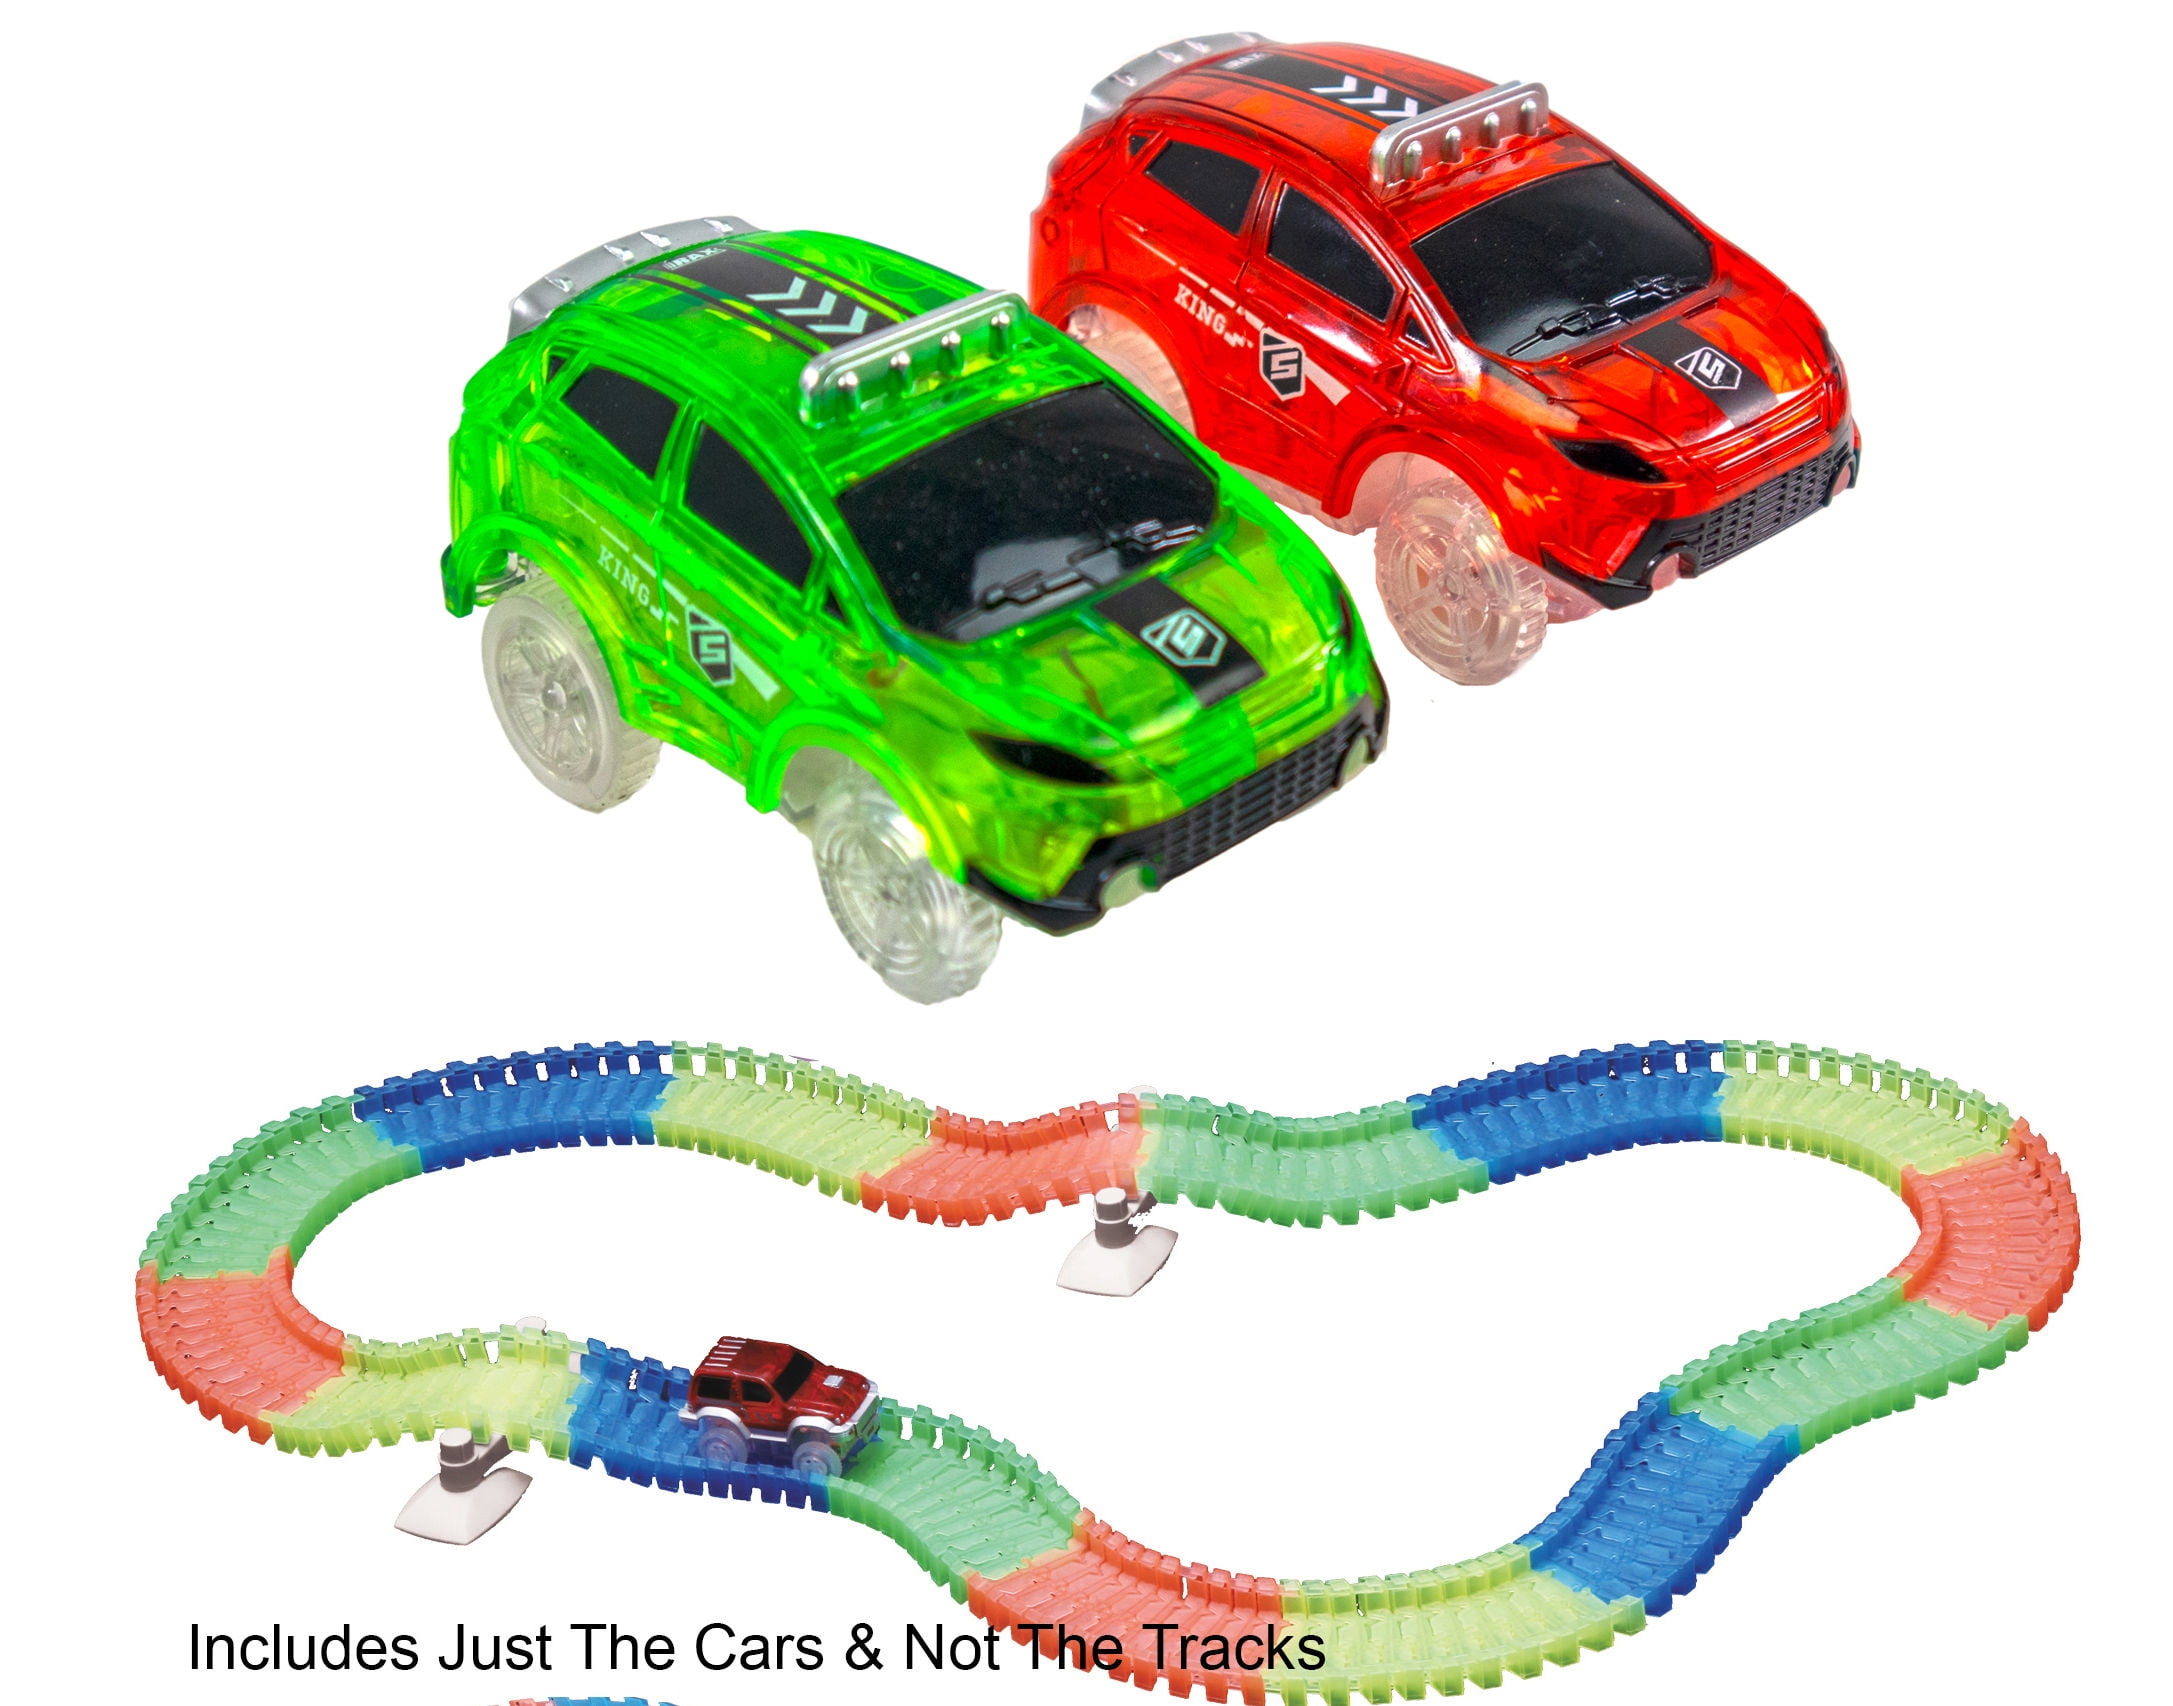 Magic Track Glow in the Dark Amazing Racetrack Light Up Car Educational Toy UK ` 